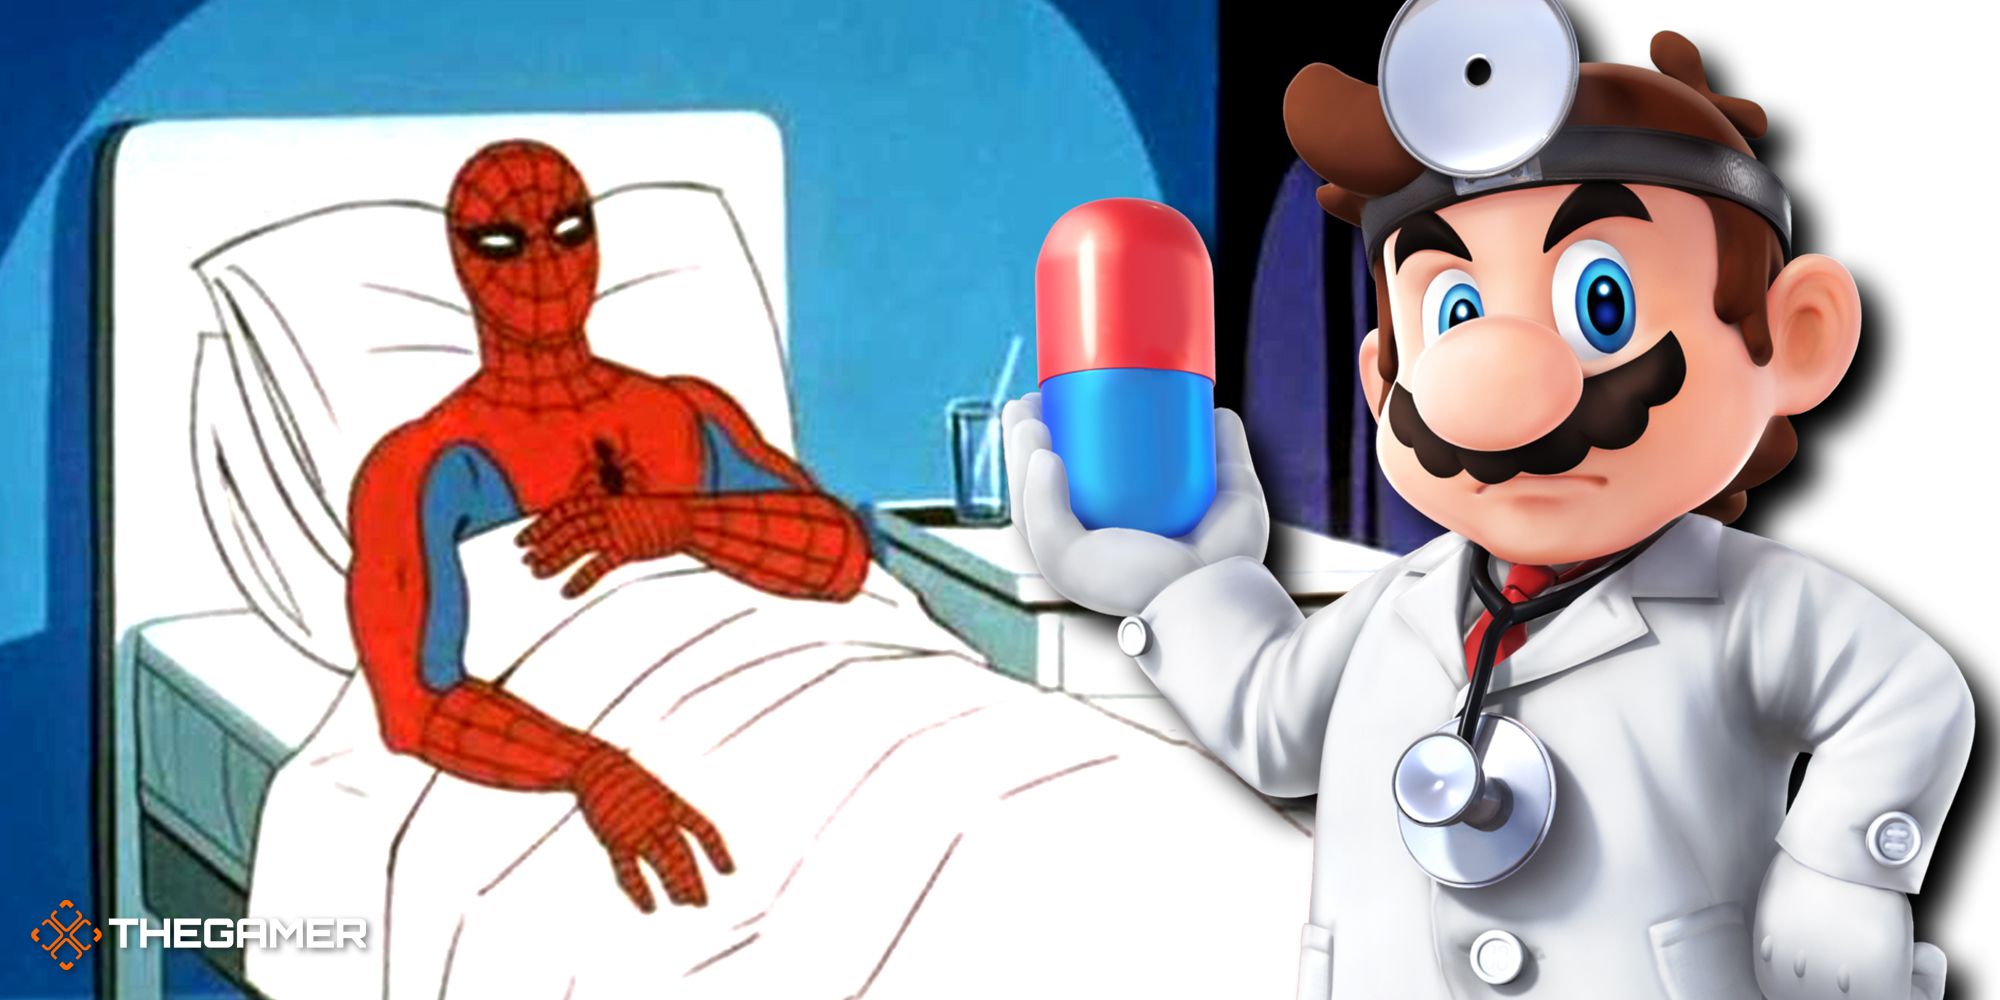 Shigeru Miyamoto Says Dr. Mario Is Not A Doctor And Shouldn’t Be Trusted